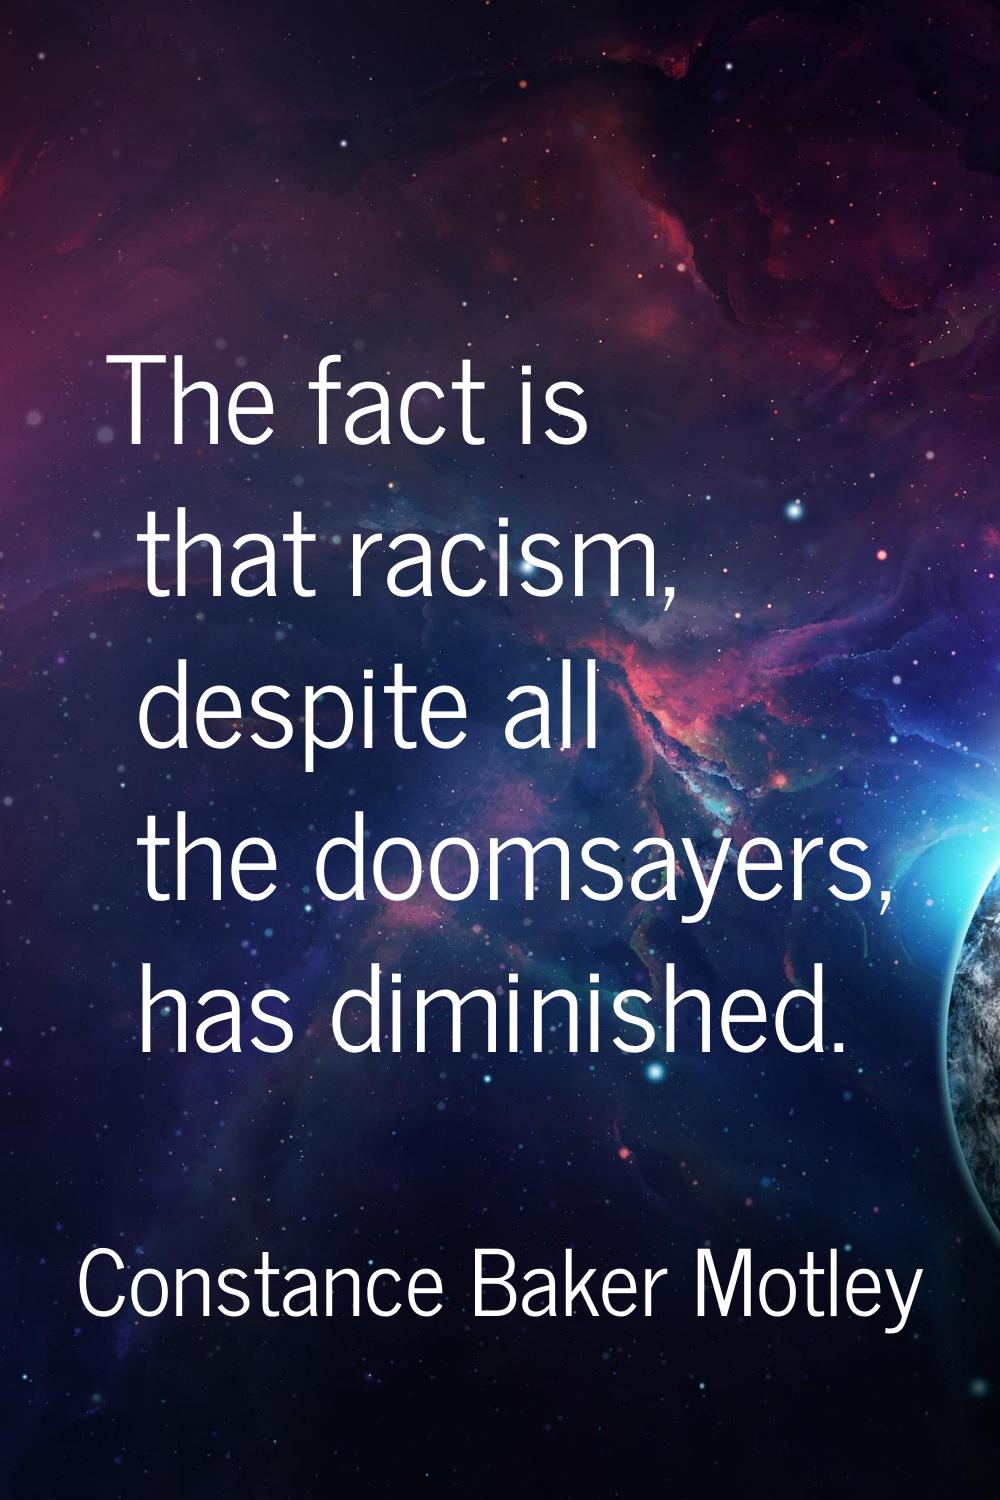 The fact is that racism, despite all the doomsayers, has diminished.